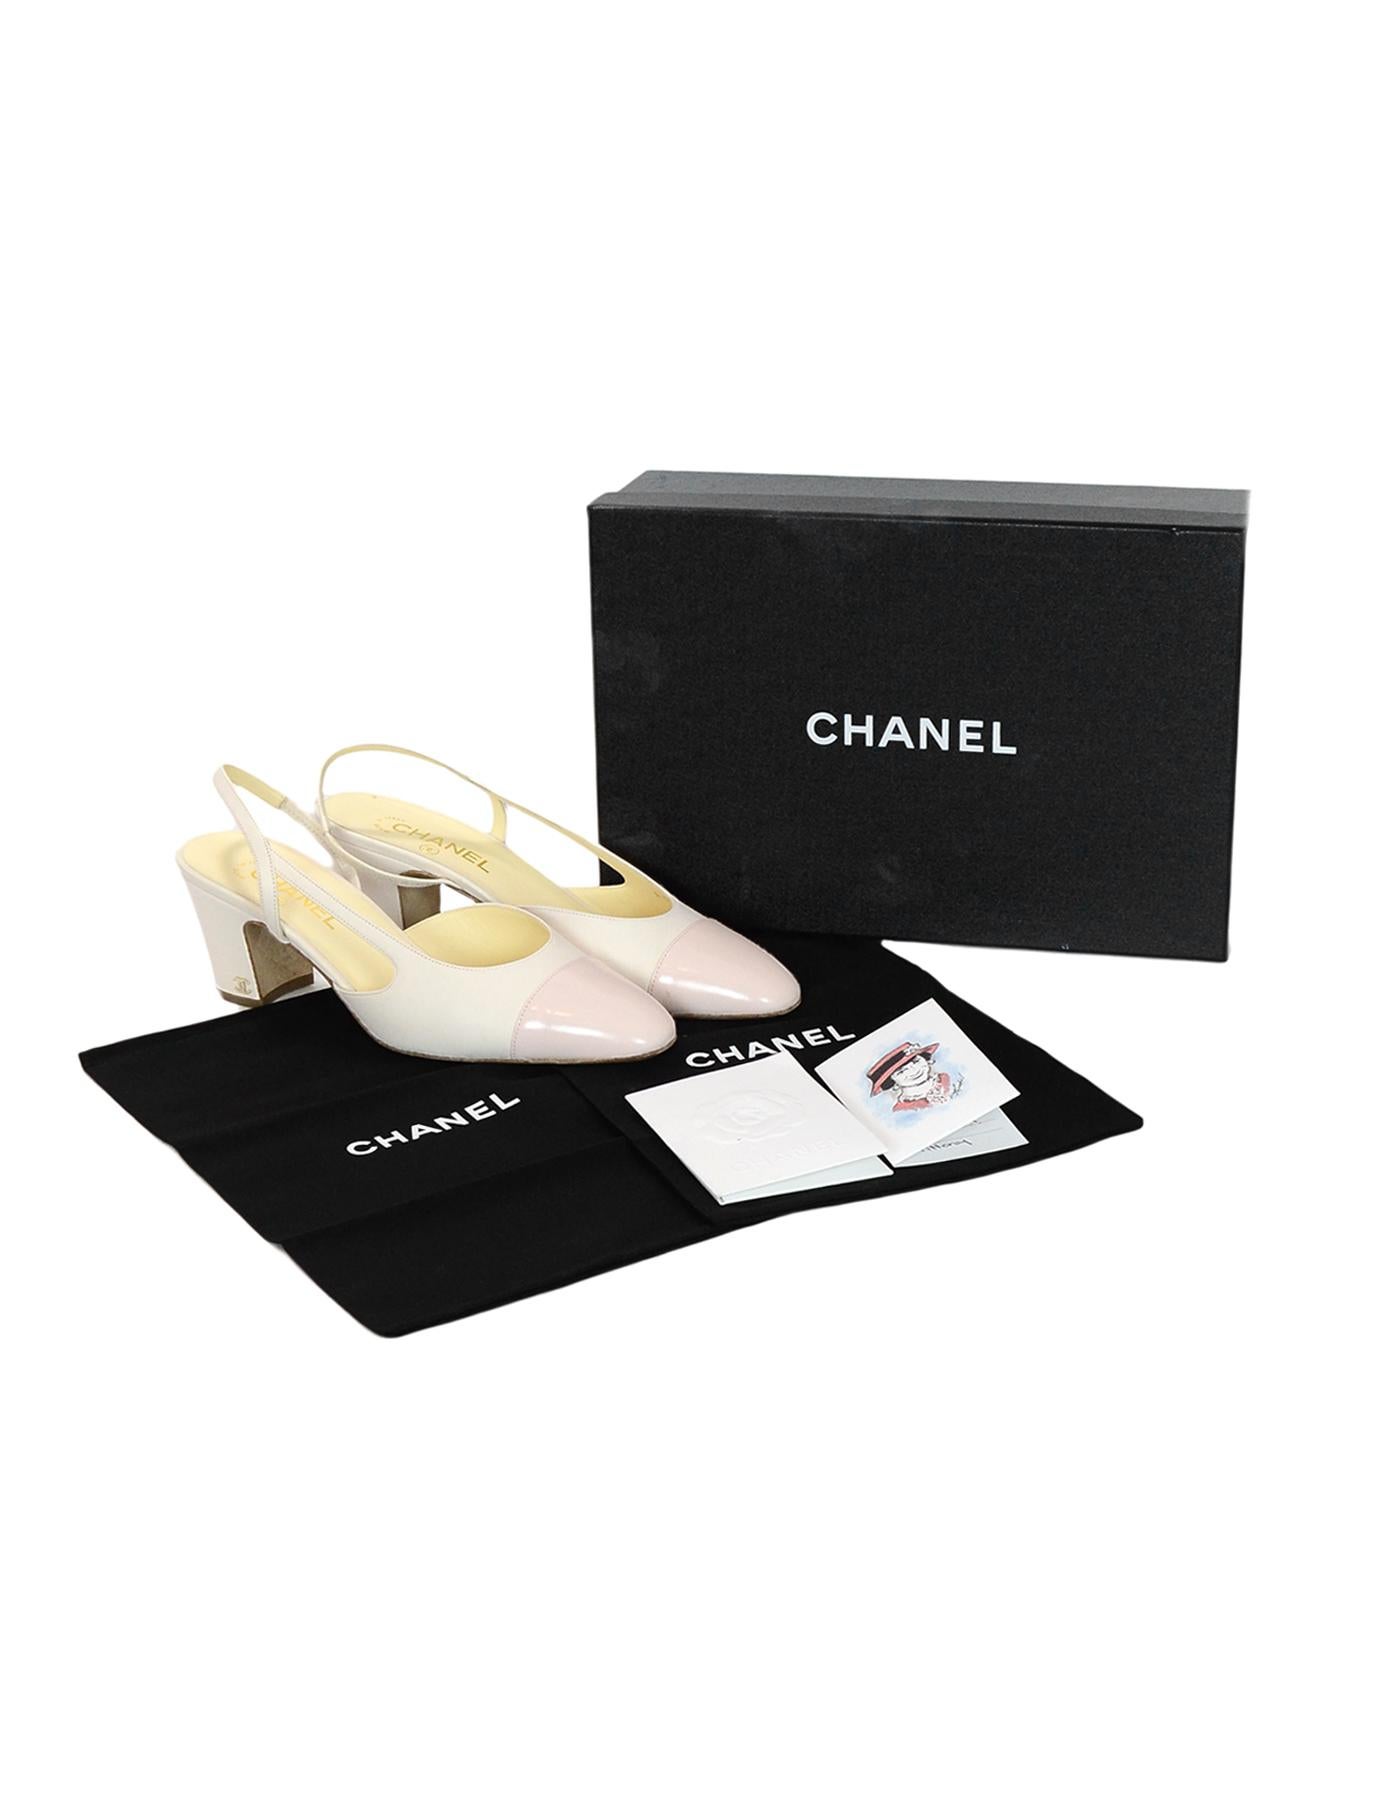 Chanel White Leather W/ Pink Glazed Cap Toe Slingback Heels Sz 40.5

Made In: Italy
Year of Production: 2017
Color: White and light pink
Hardware: Pale goldtone
Materials: Leather, glazed leather and metal
Closure/Opening:  Sling back
Overall